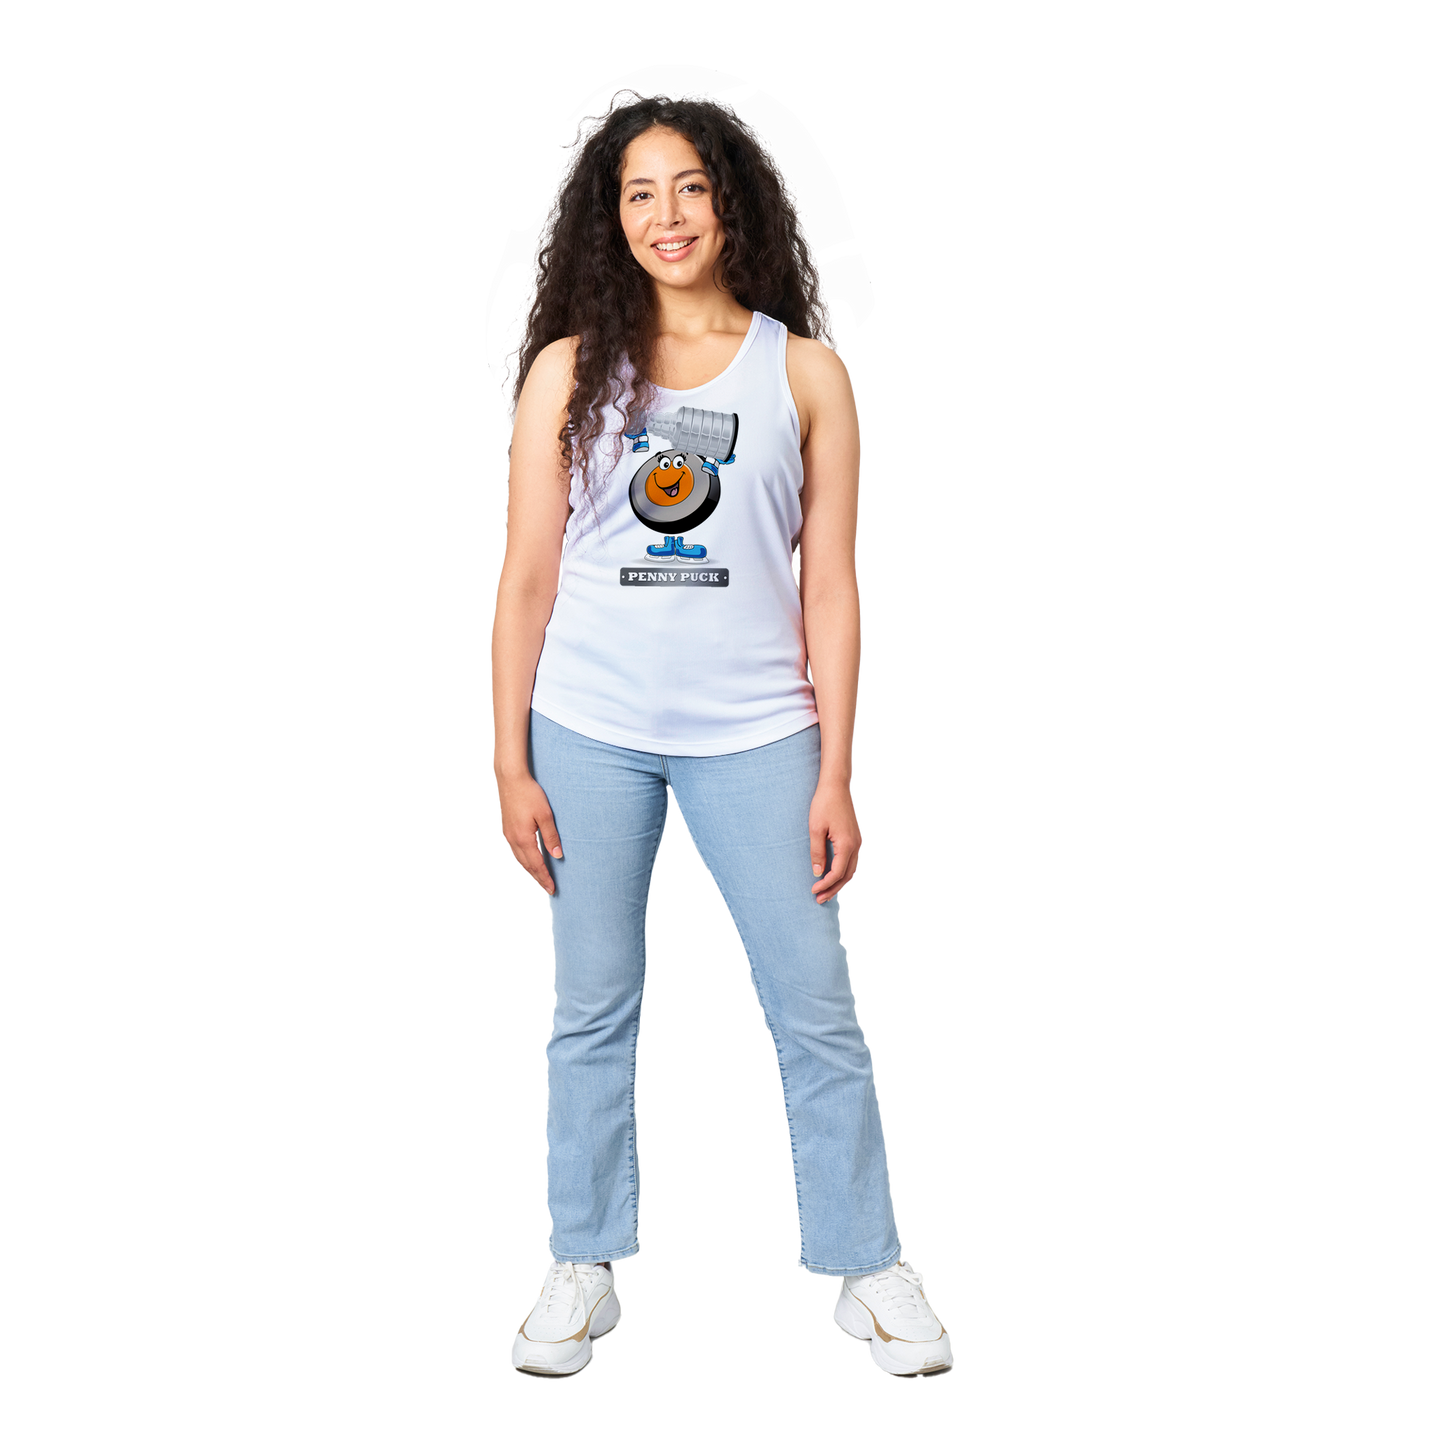 Penny Puck Stanley Cup Performance Women's Tank Top